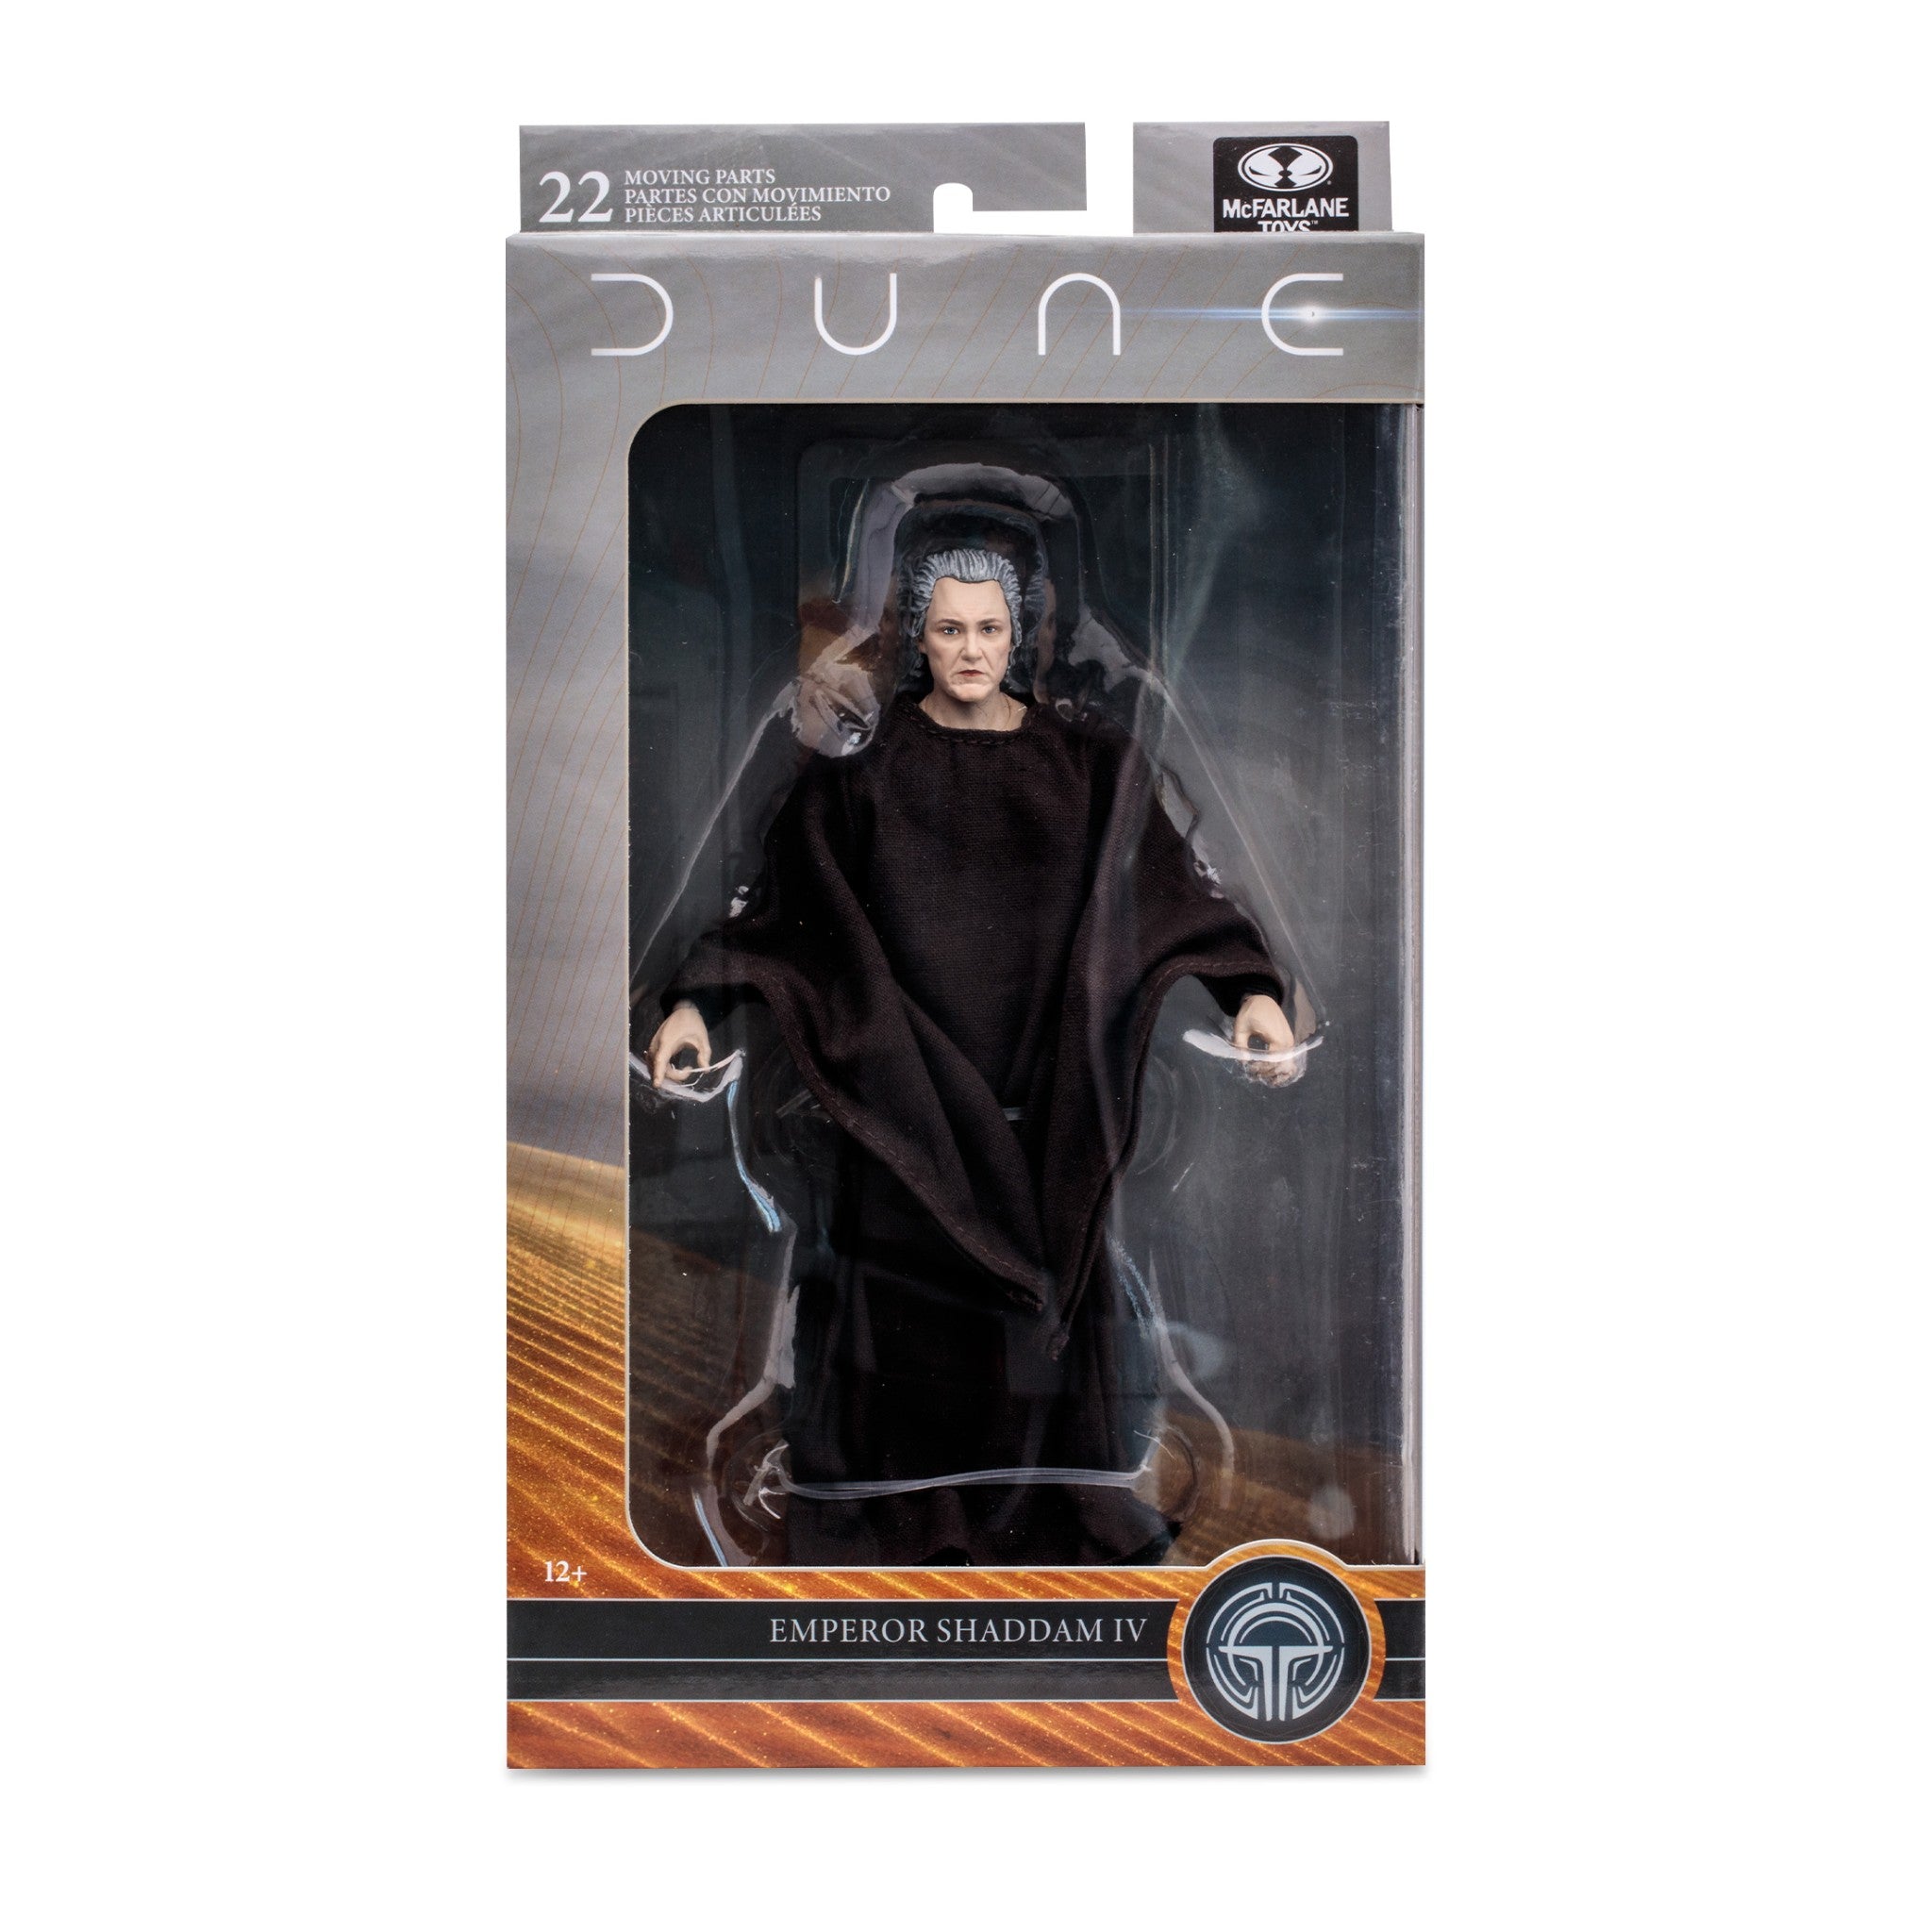 Dune Movie Part Two 2 Emperor Shaddam IV 7" Action Figure - McFarlane Toys-1